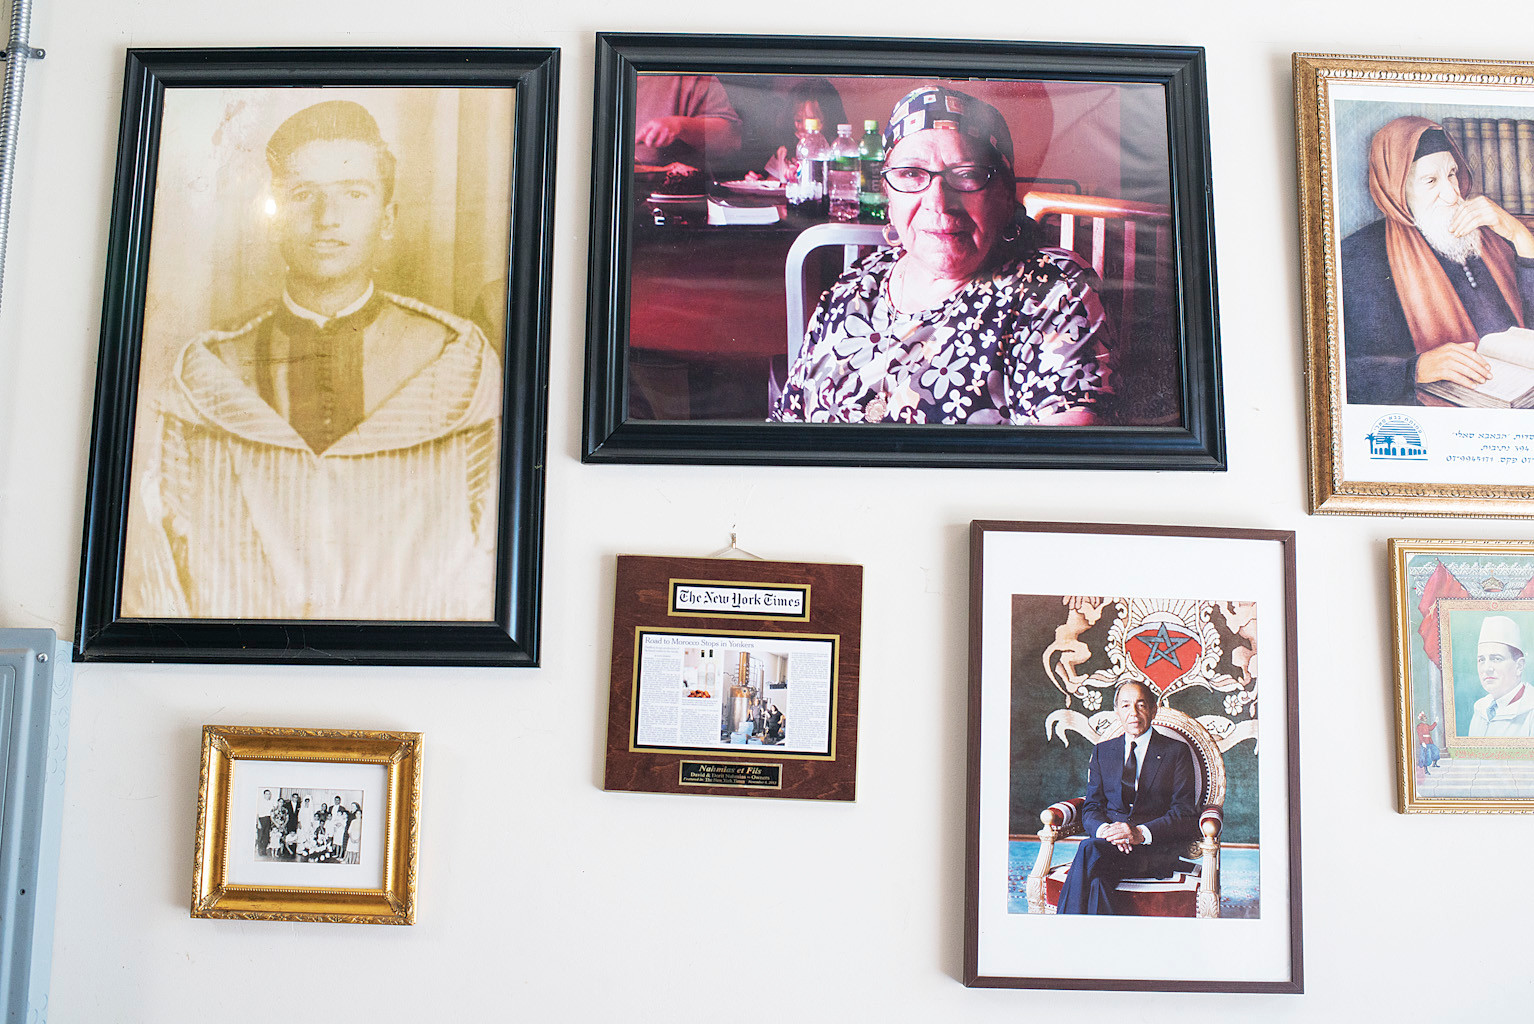 Clockwise from left: The parents of David Nahmias, Kabbalist Baba Sali, two pictures of Moroccan royalty, a news article, and a family portrait - on the wall at Nahmias et Fils.